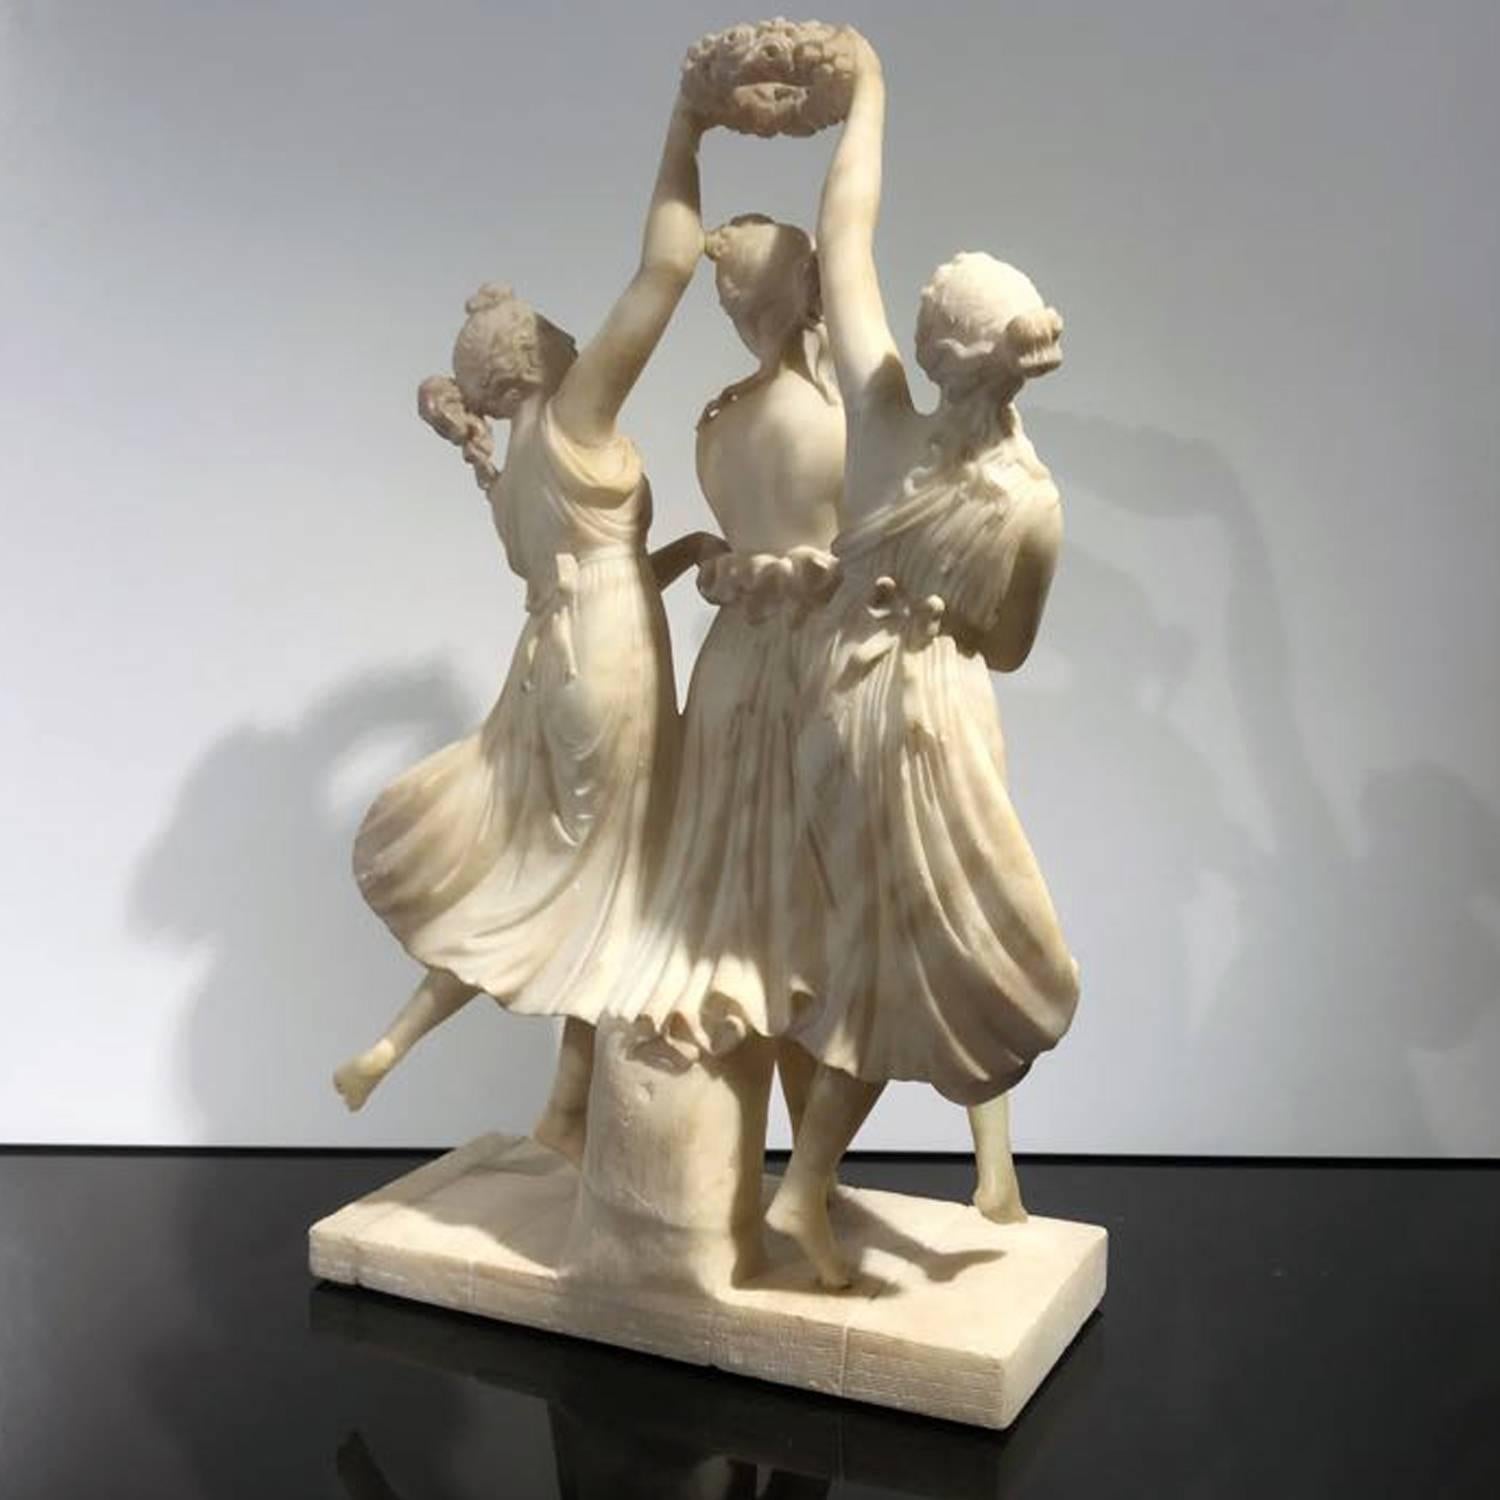 A superb sculpture of the three graces, inspired by the painting of 